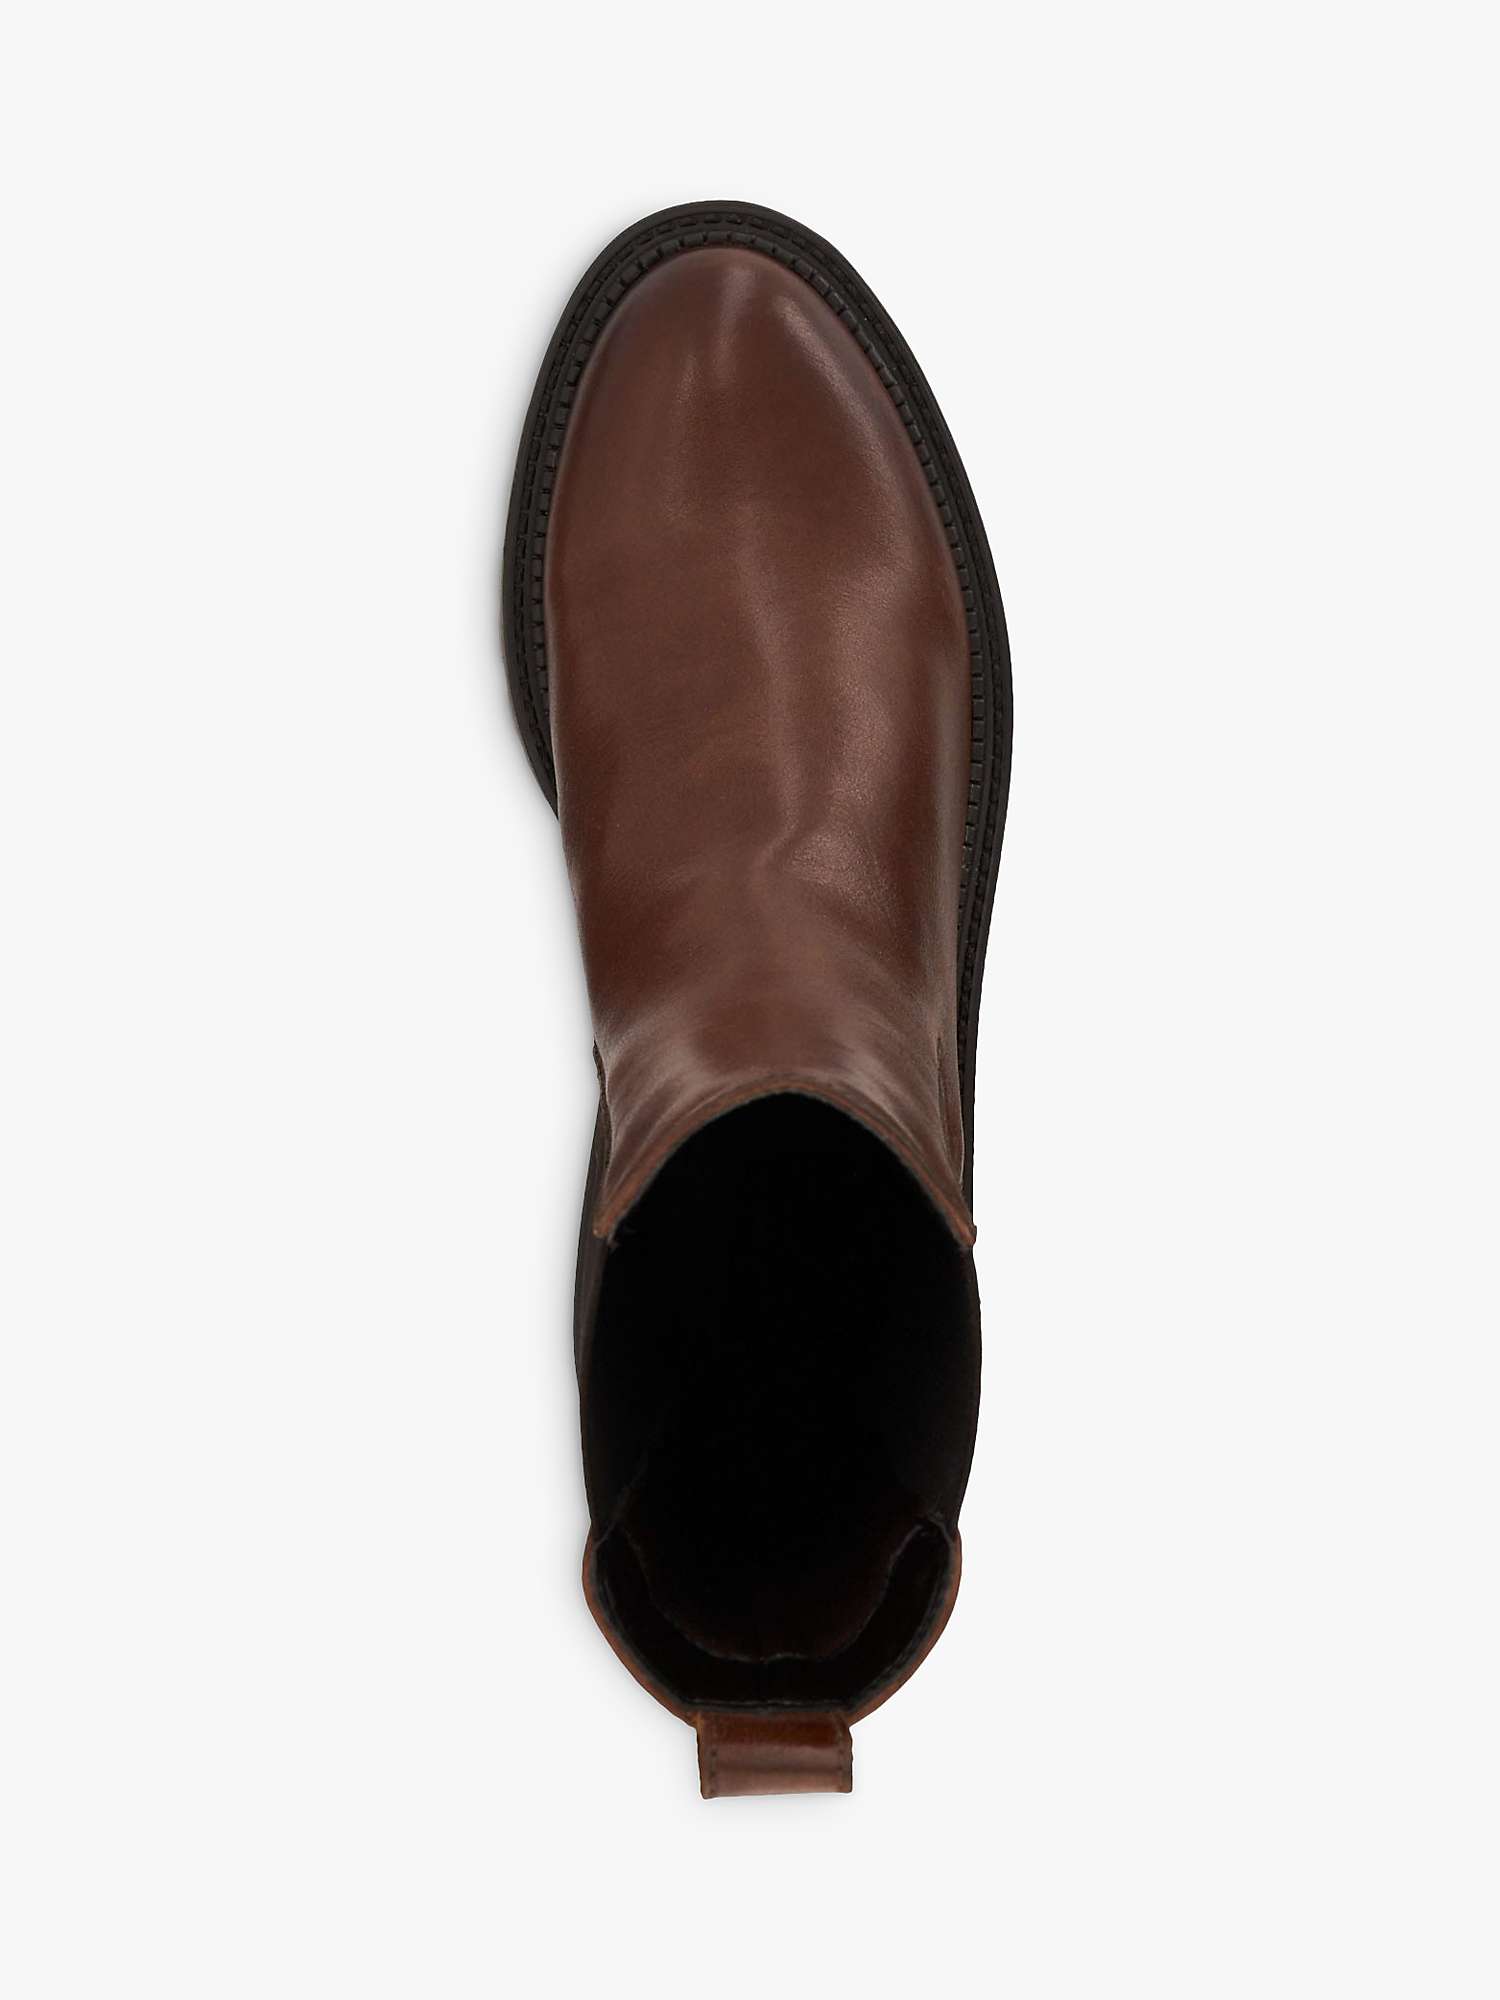 Buy Dune Picture Leather Chelsea Boots Online at johnlewis.com